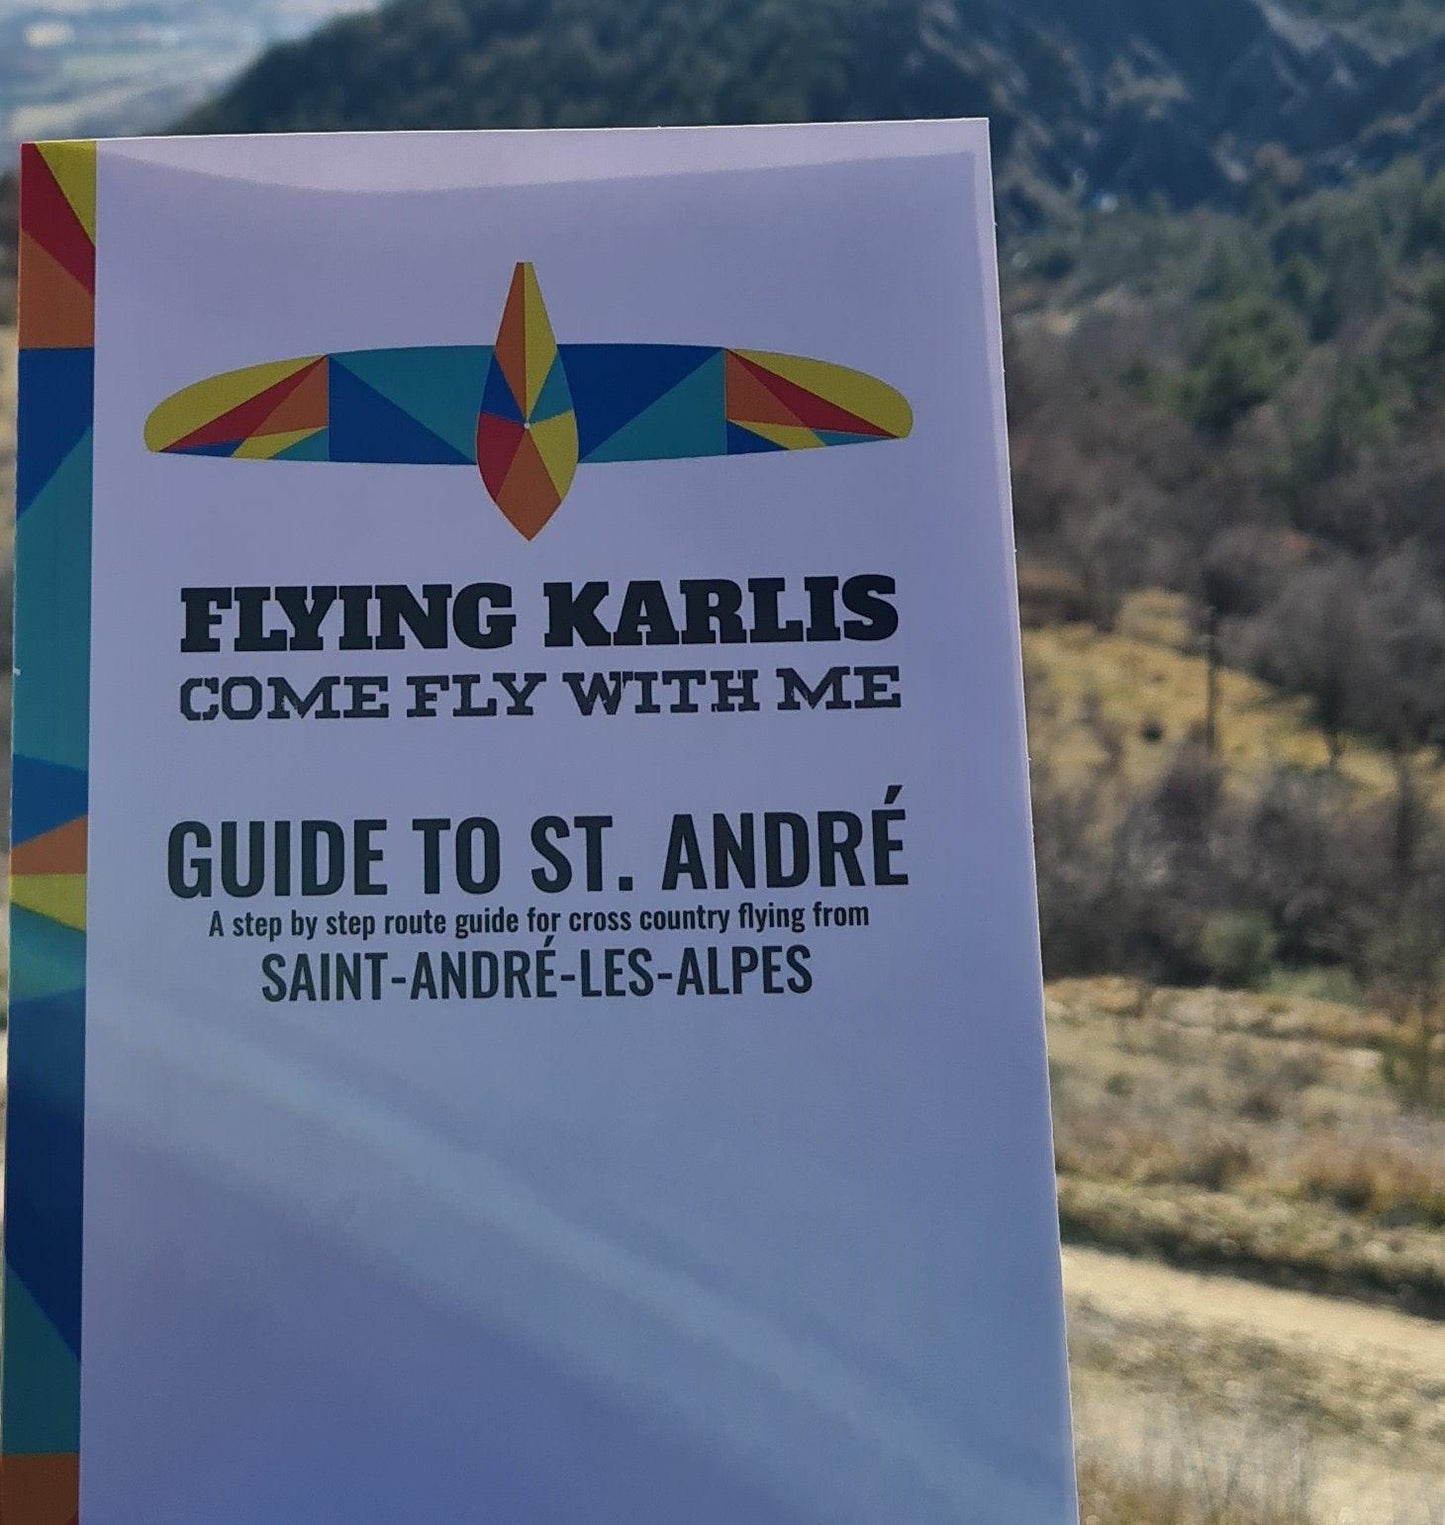 GUIDE TO ST.ANDRÉ - A step by step route guide for cross country flying from SAINT-ANDRÉ-LES-ALPES. - flyingkarlis